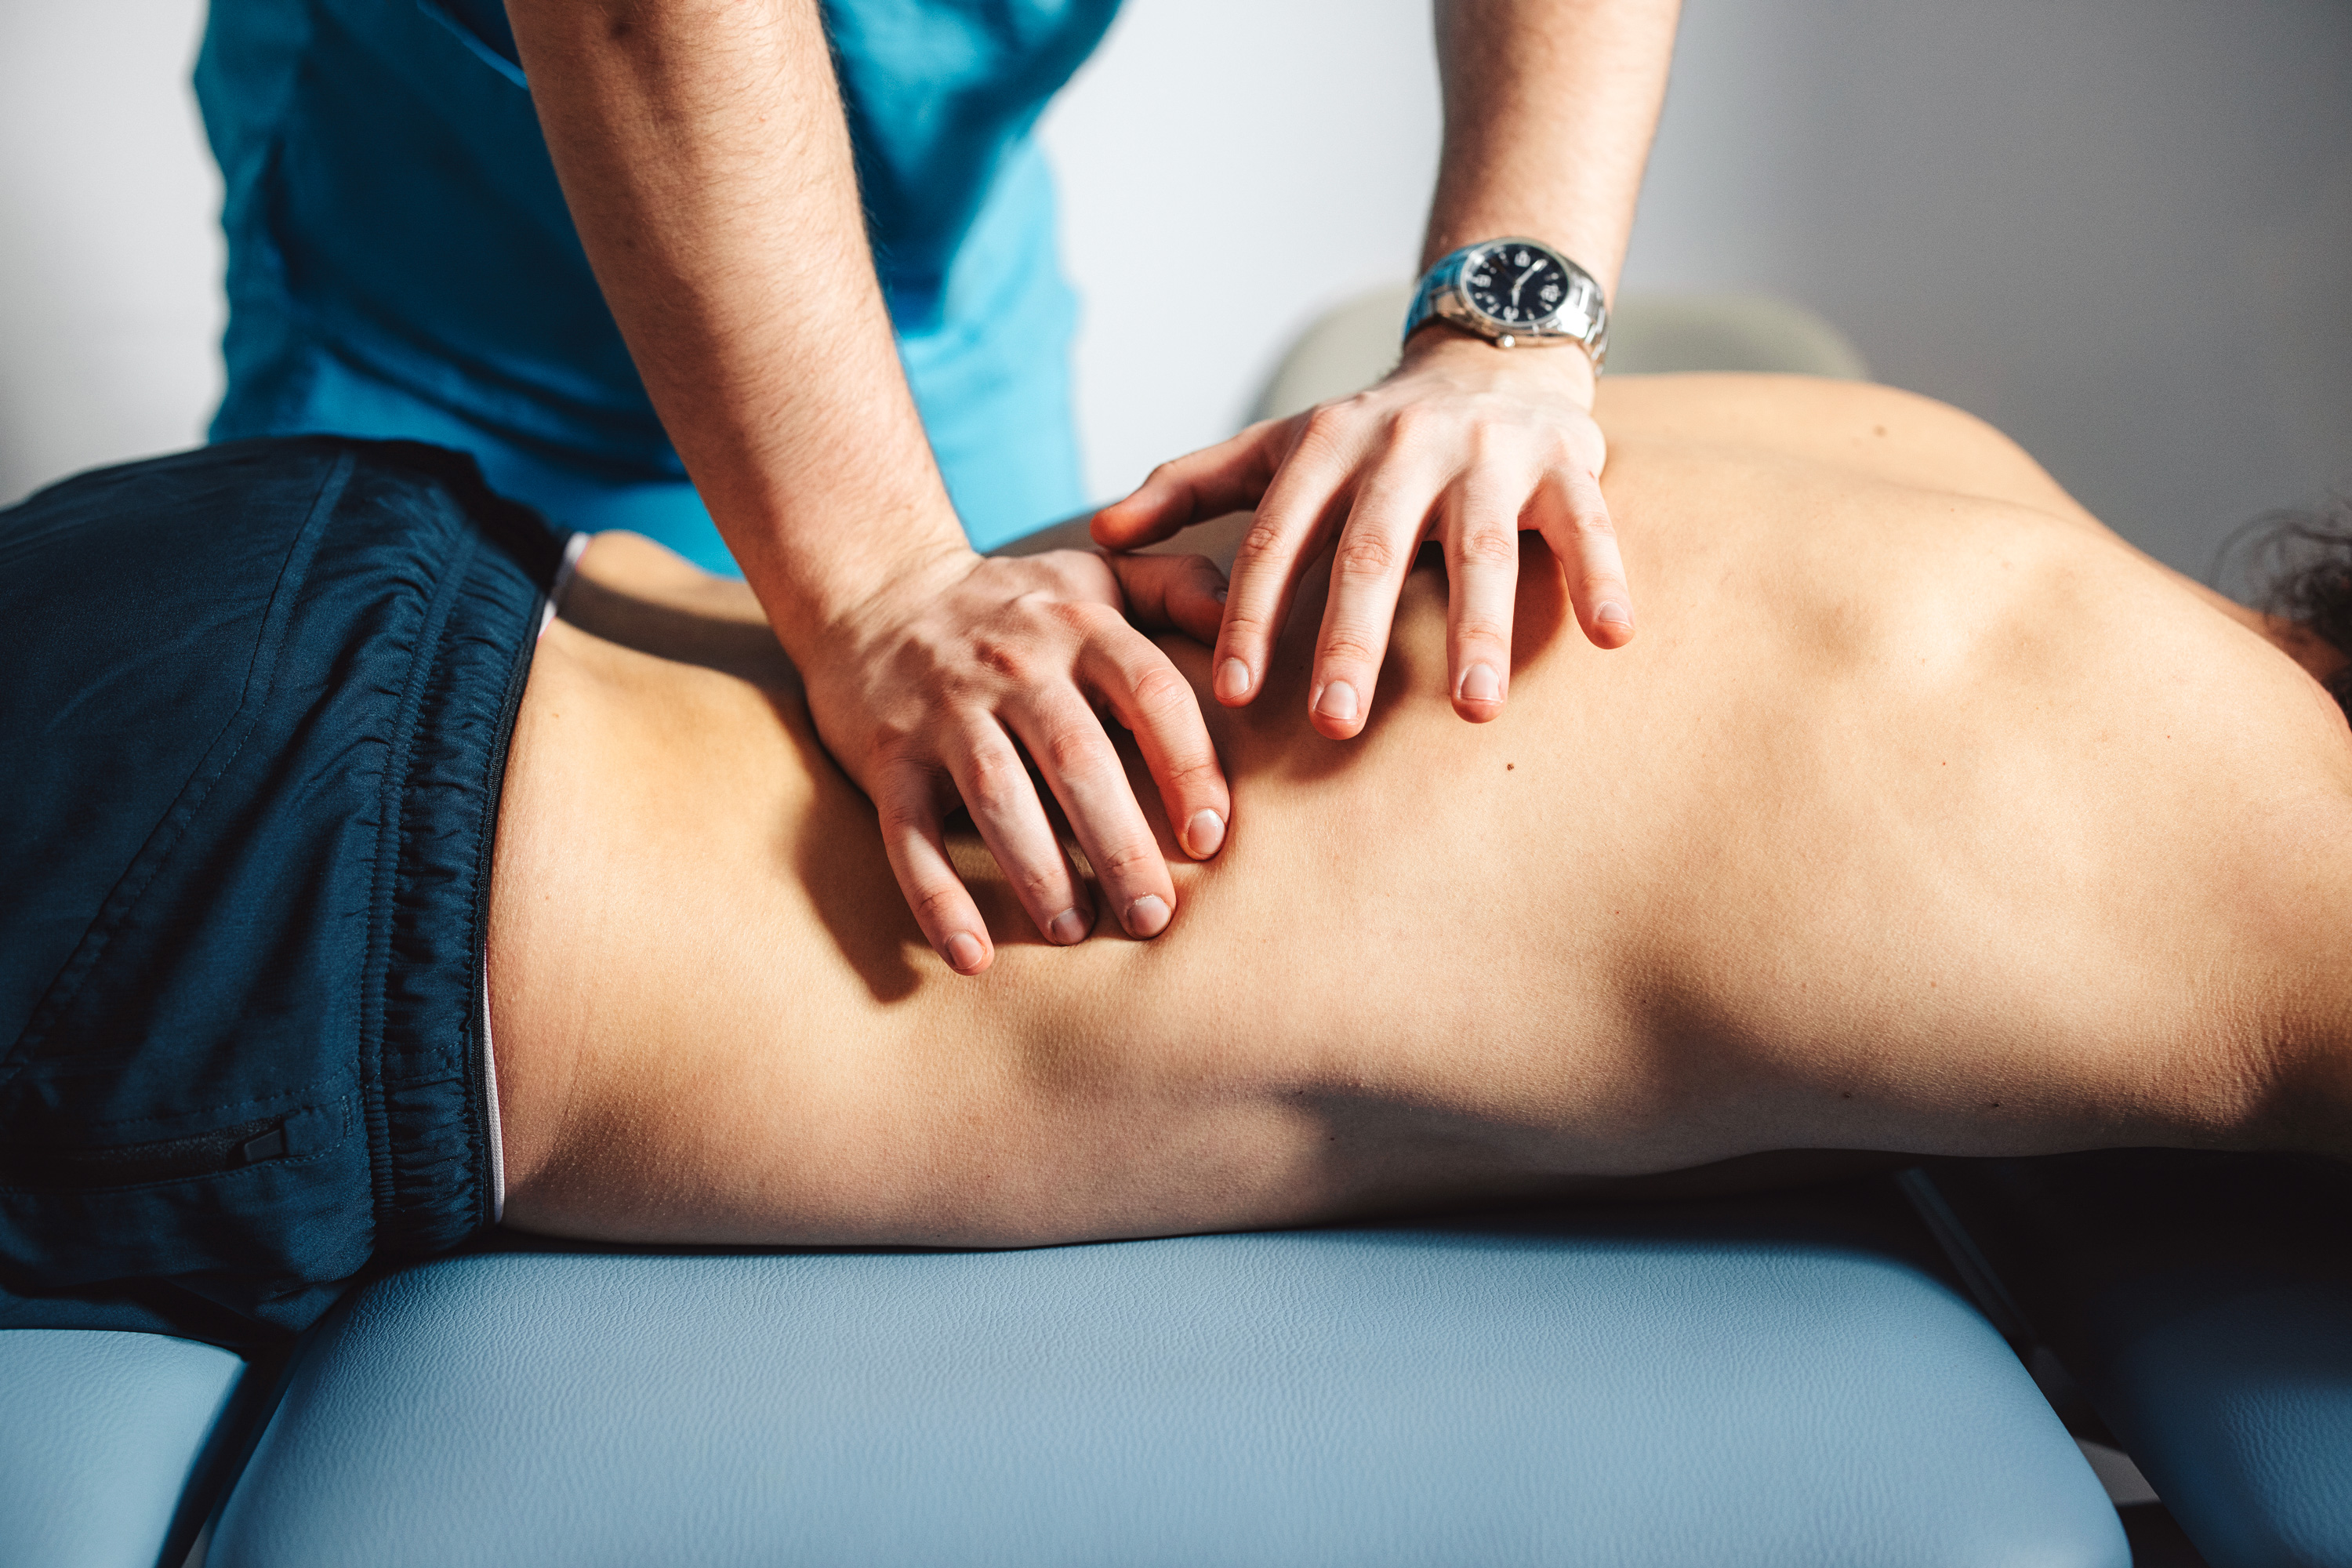 Use of Electrotherapy With A Chiropractic Treatment Plan